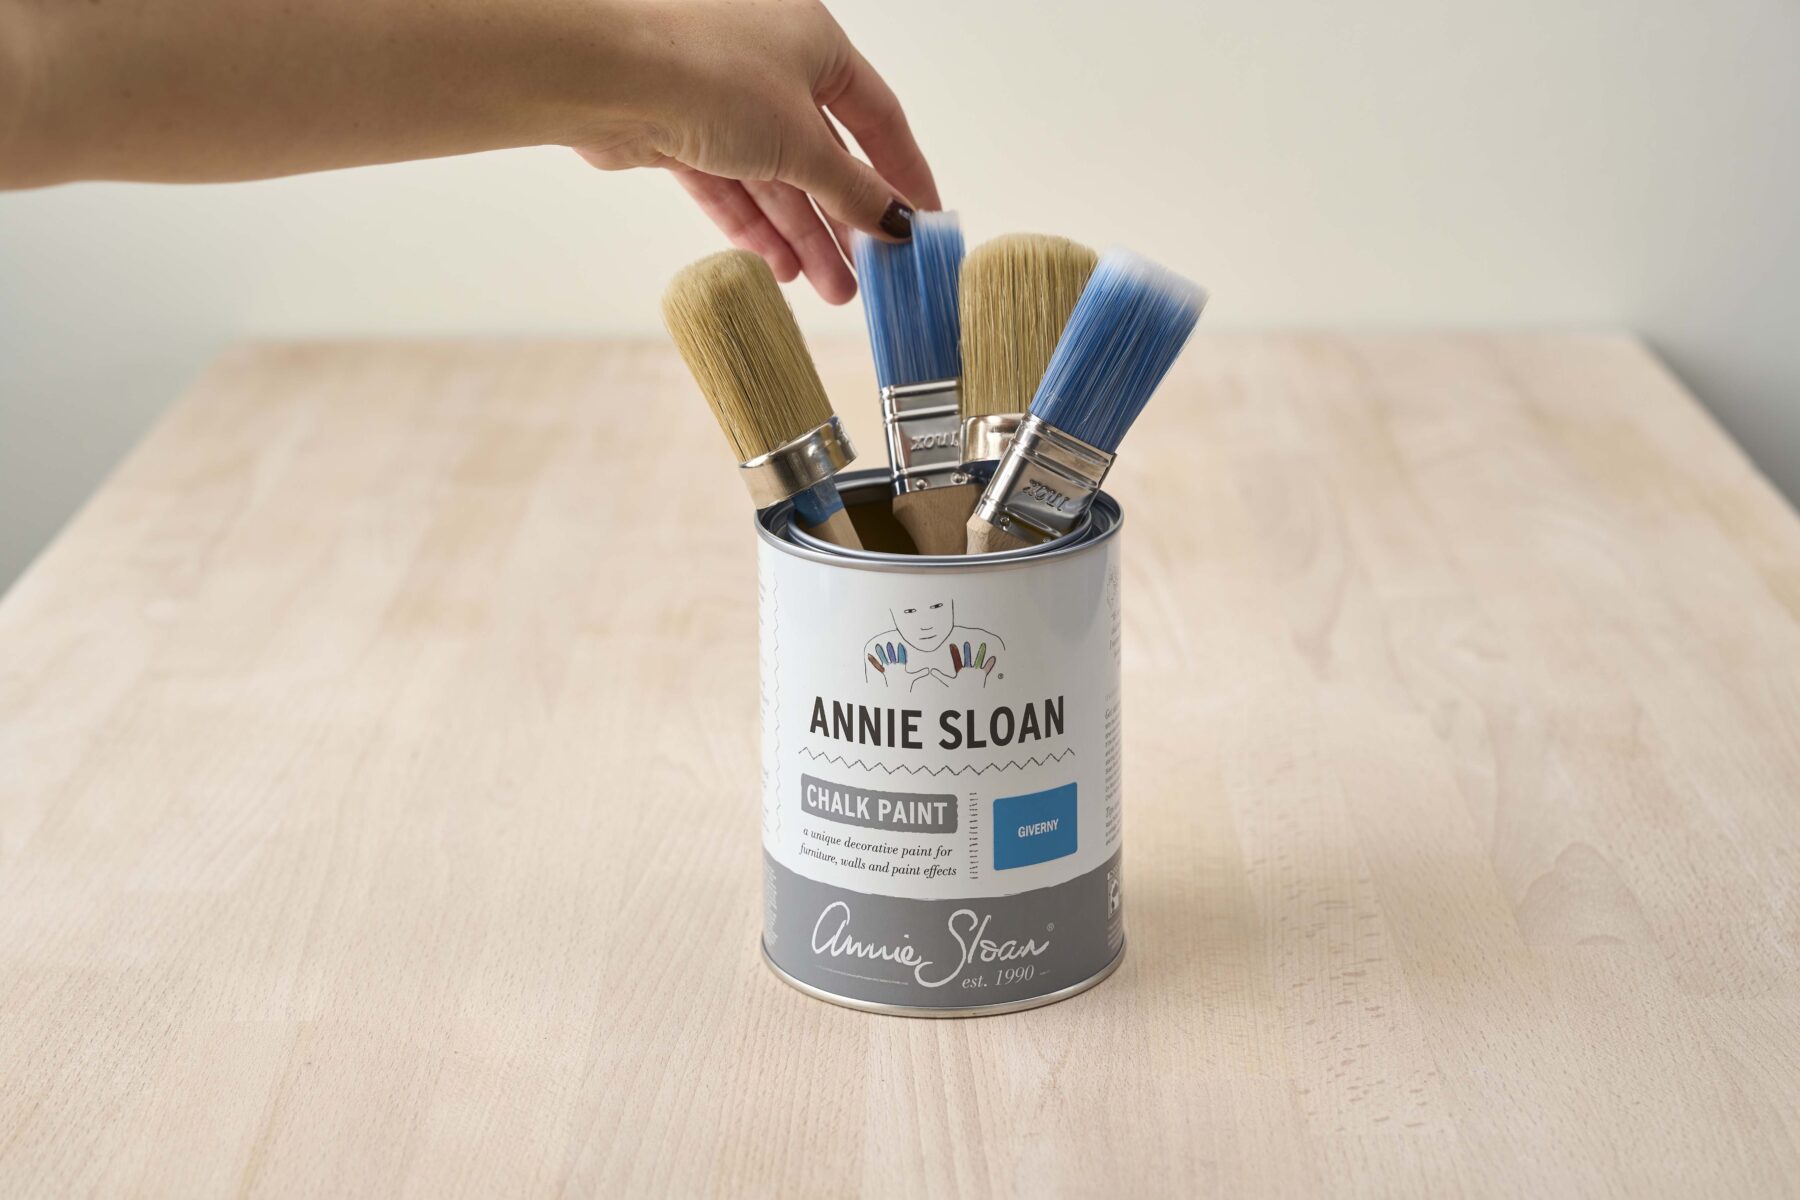 Annie Sloan Chalk Paint tin being used as a paint brush holder